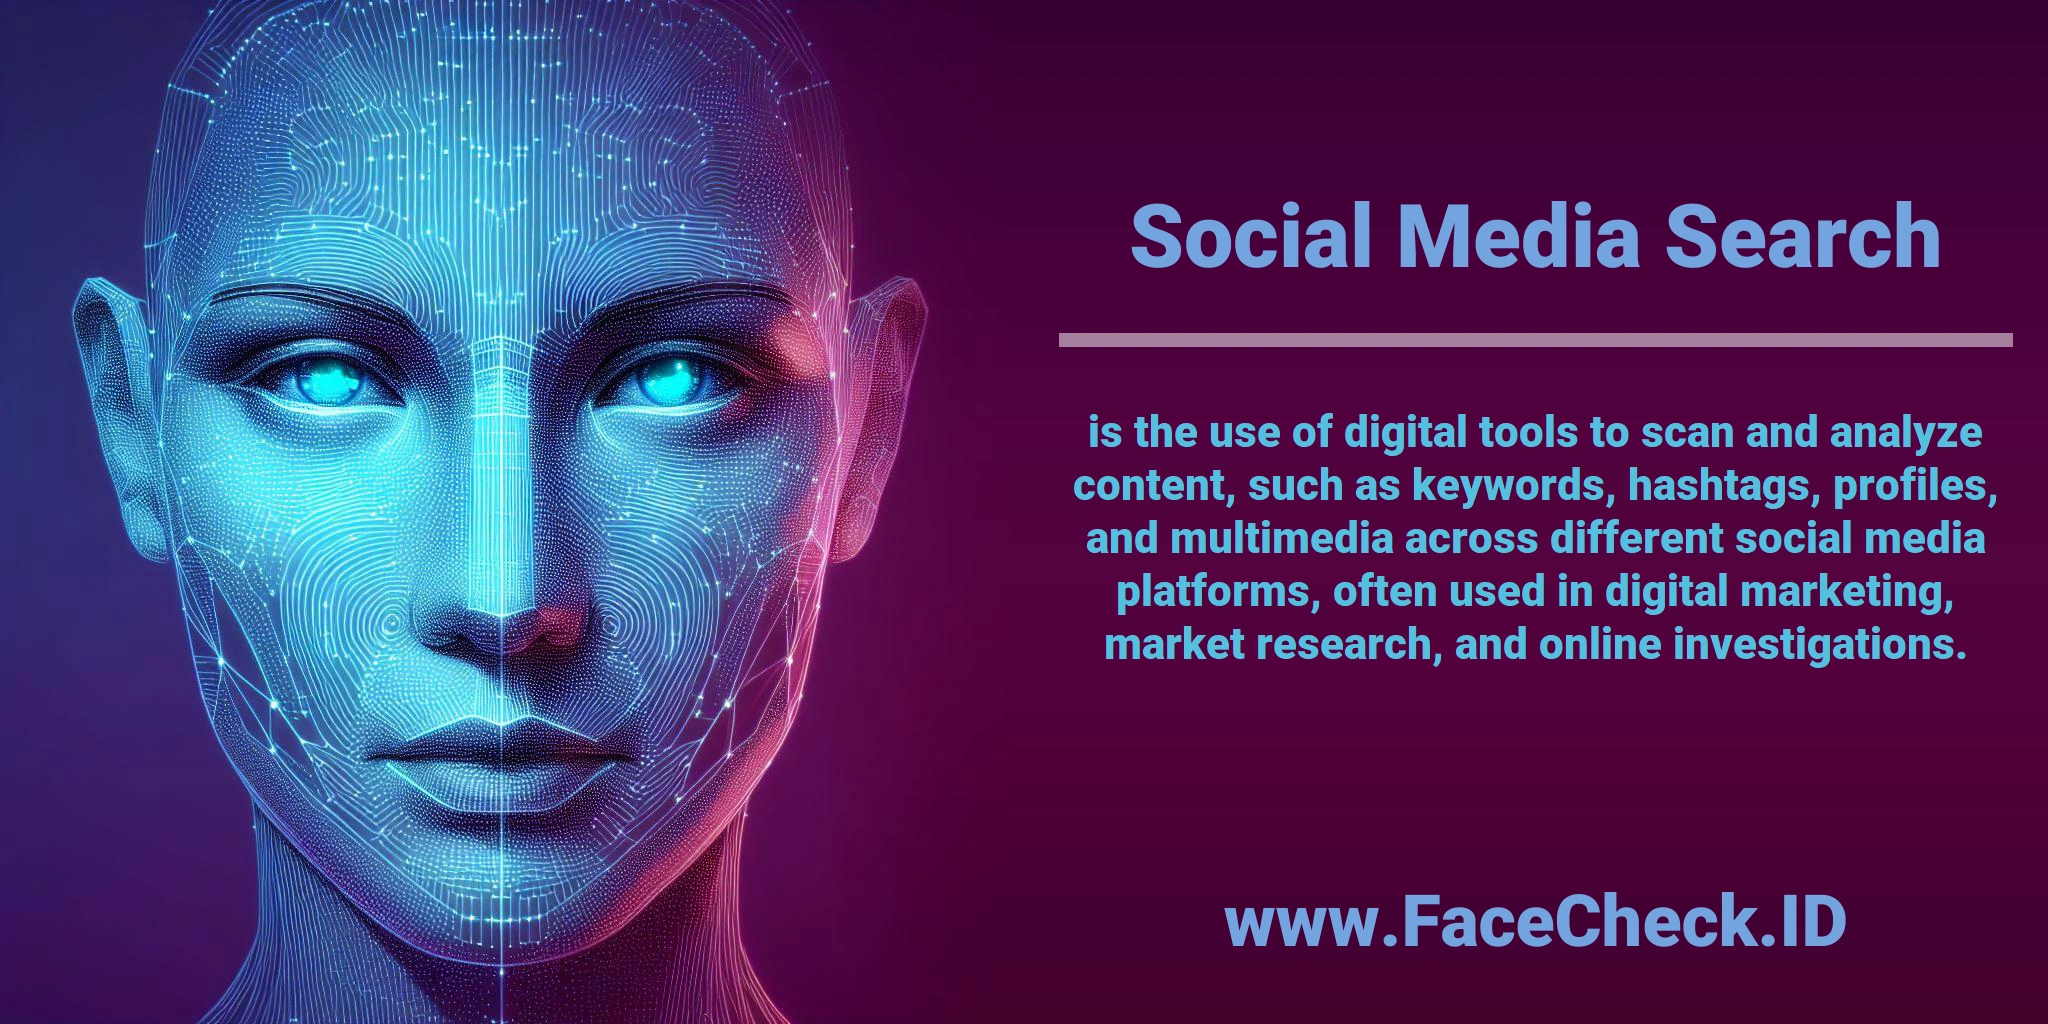 <b>Social Media Search</b> is the use of digital tools to scan and analyze content, such as keywords, hashtags, profiles, and multimedia across different social media platforms, often used in digital marketing, market research, and online investigations.
